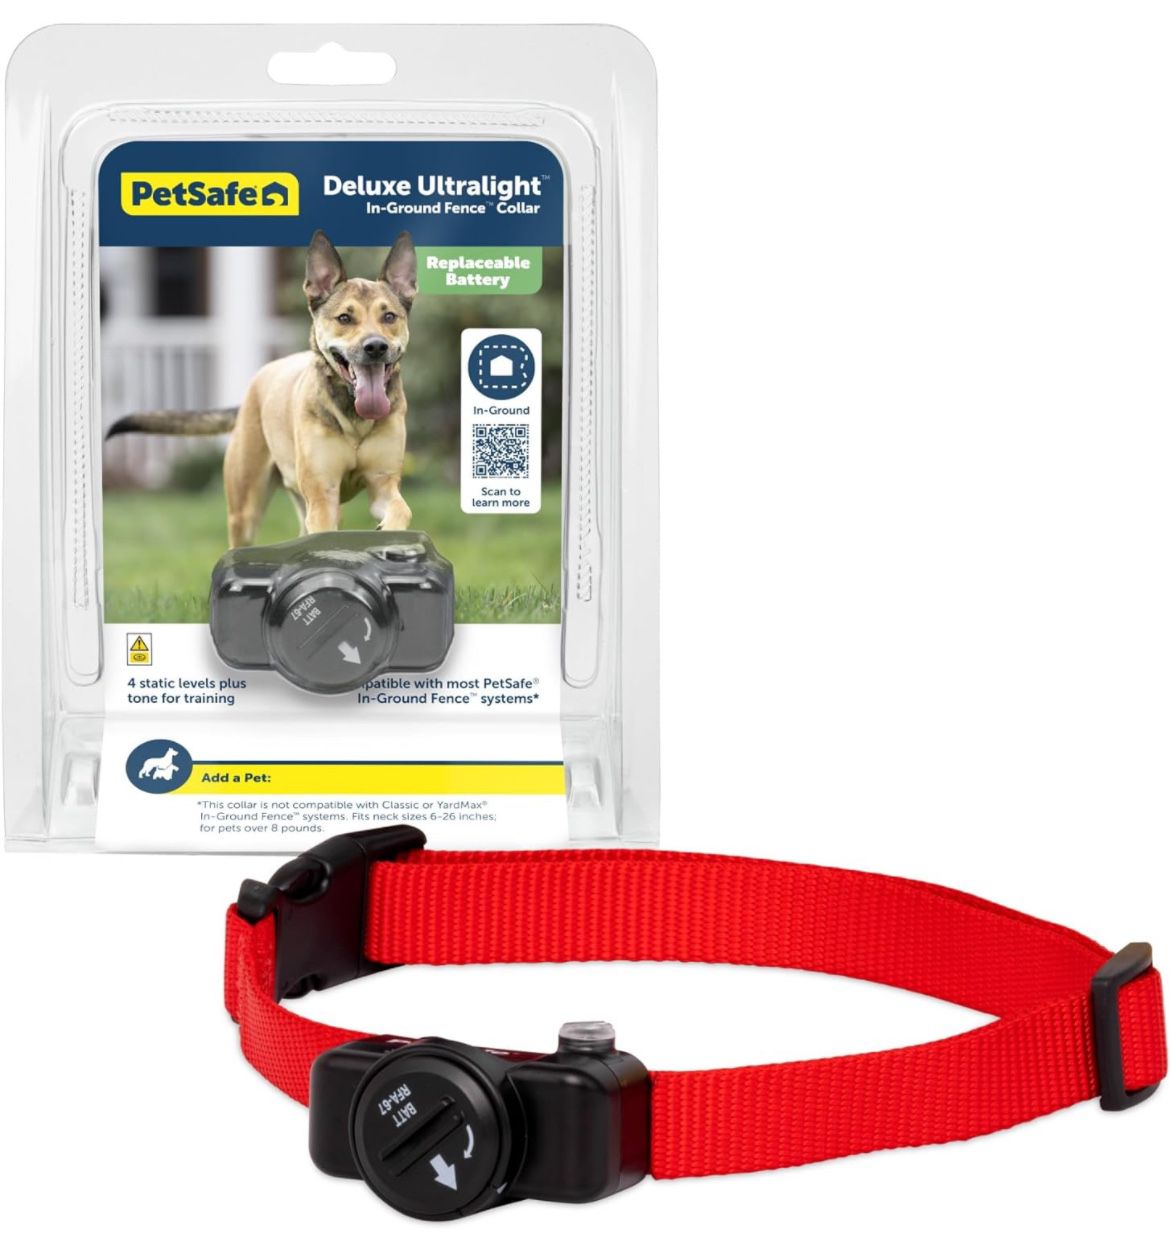 PetSafe Basic In-Ground Fence Battery-Operated Receiver Collar for Dogs & Cats